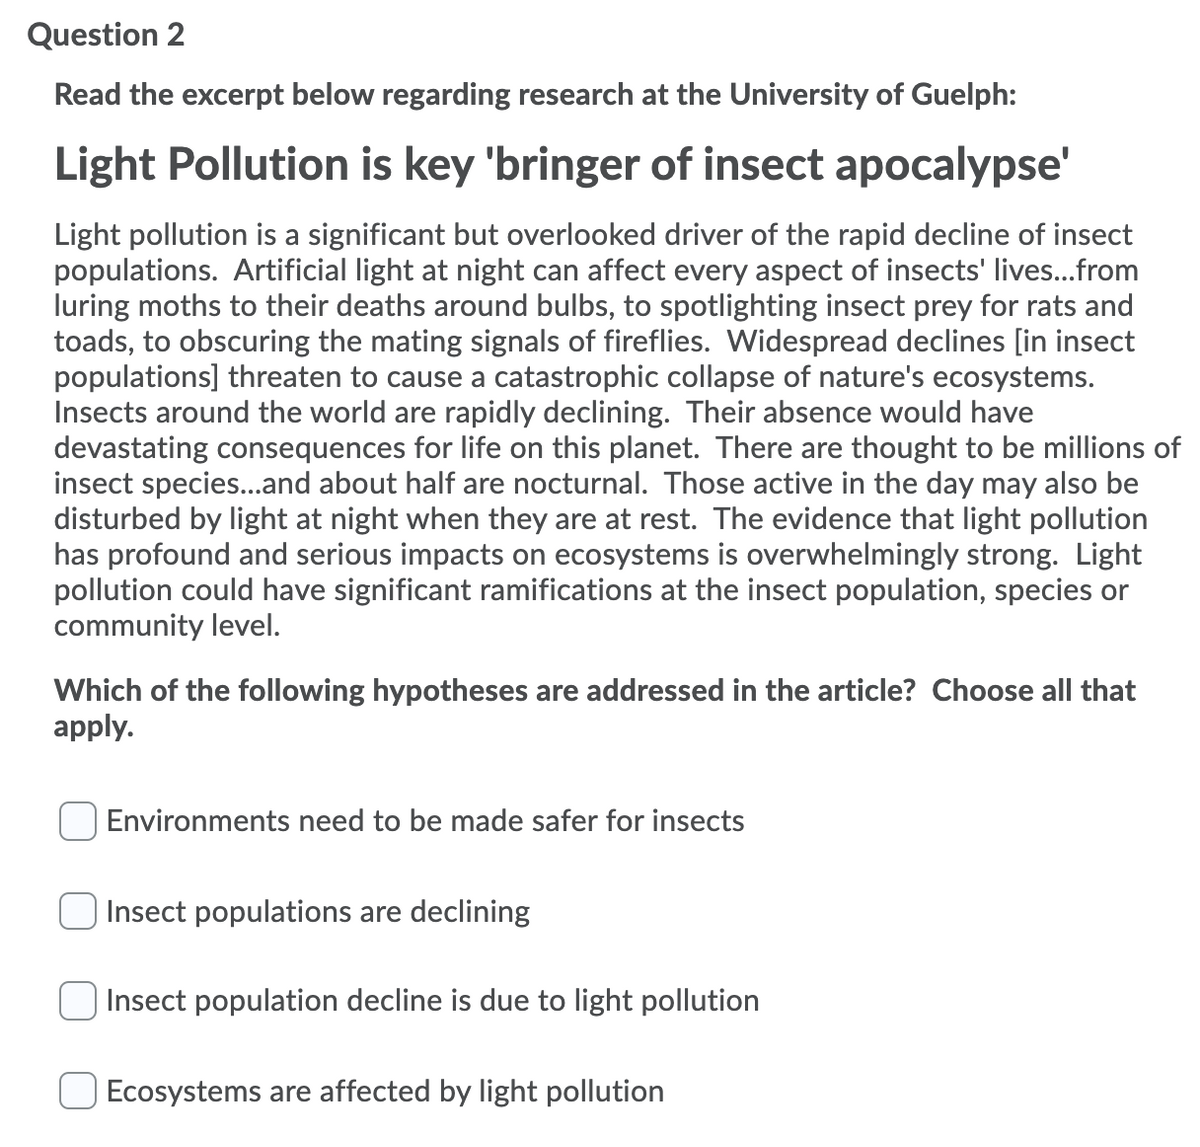 Question 2
Read the excerpt below regarding research at the University of Guelph:
Light Pollution is key 'bringer of insect apocalypse'
Light pollution is a significant but overlooked driver of the rapid decline of insect
populations. Artificial light at night can affect every aspect of insects' lives...from
luring moths to their deaths around bulbs, to spotlighting insect prey for rats and
toads, to obscuring the mating signals of fireflies. Widespread declines [in insect
populations] threaten to cause a catastrophic collapse of nature's ecosystems.
Insects around the world are rapidly declining. Their absence would have
devastating consequences for life on this planet. There are thought to be millions of
insect species...and about half are nocturnal. Those active in the day may also be
disturbed by light at night when they are at rest. The evidence that light pollution
has profound and serious impacts on ecosystems is overwhelmingly strong. Light
pollution could have significant ramifications at the insect population, species or
community level.
Which of the following hypotheses are addressed in the article? Choose all that
apply.
Environments need to be made safer for insects
Insect populations are declining
O Insect population decline is due to light pollution
Ecosystems are affected by light pollution
